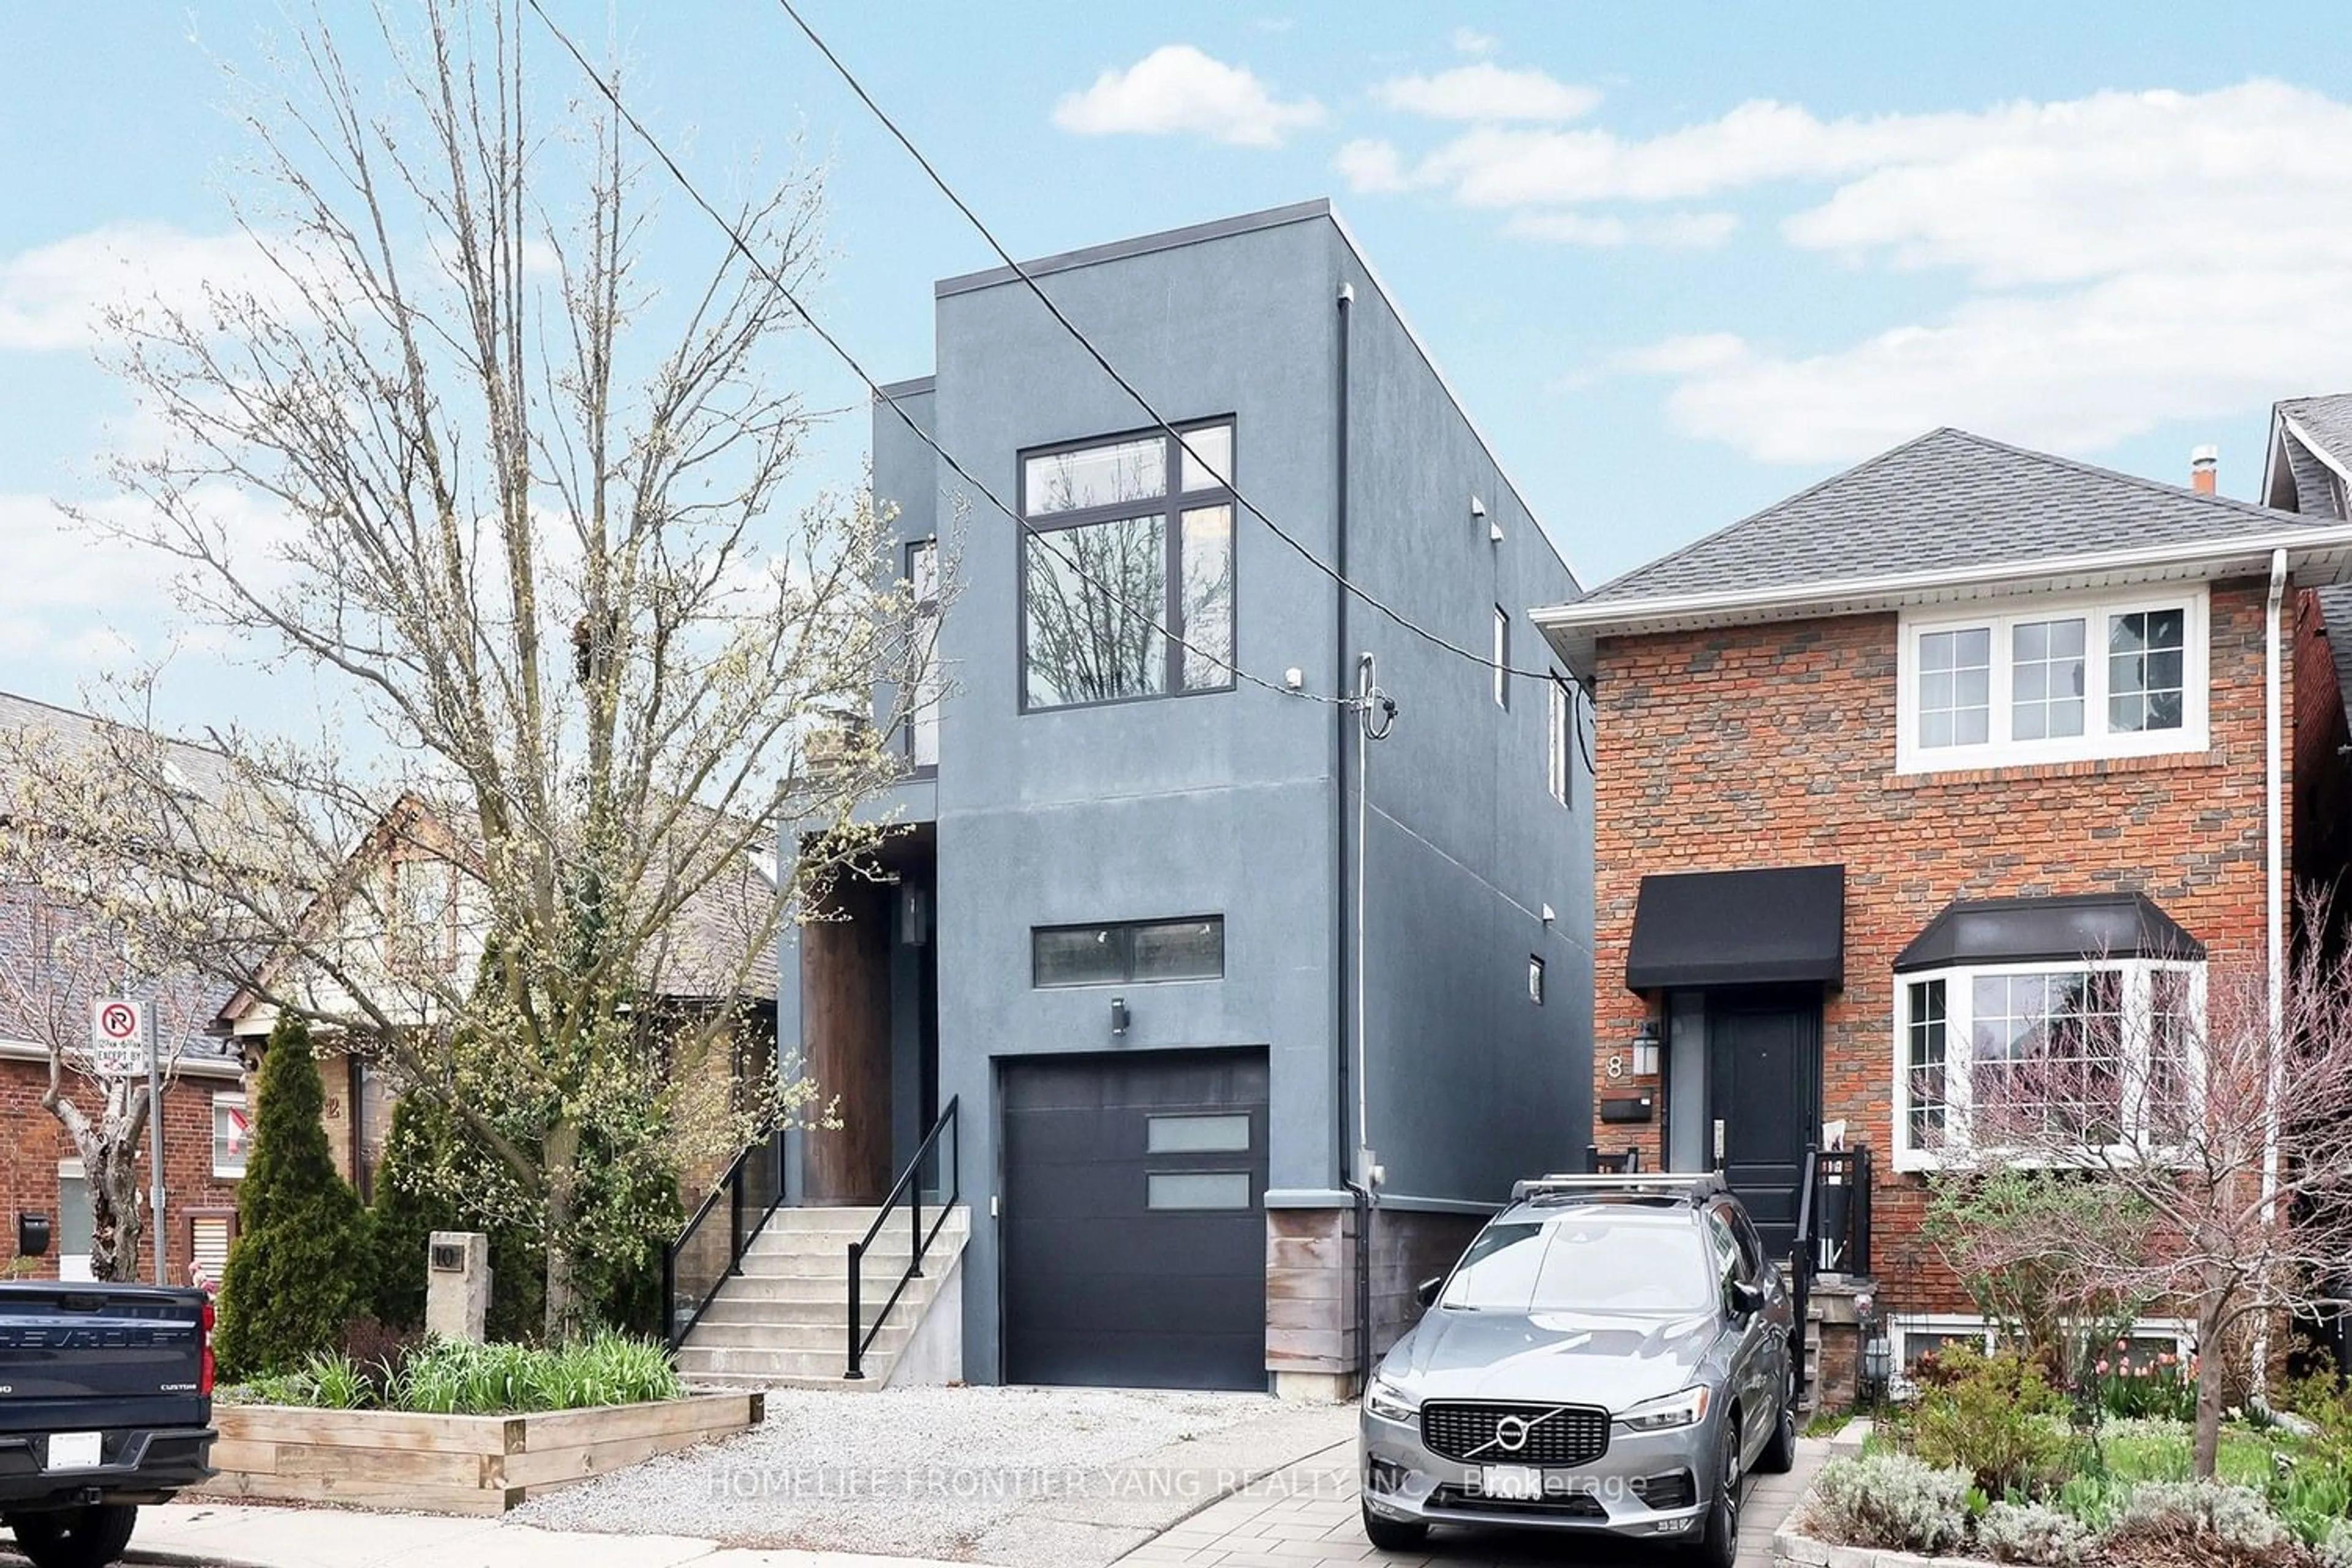 Home with brick exterior material for 10 Rexford Rd, Toronto Ontario M6S 2M3